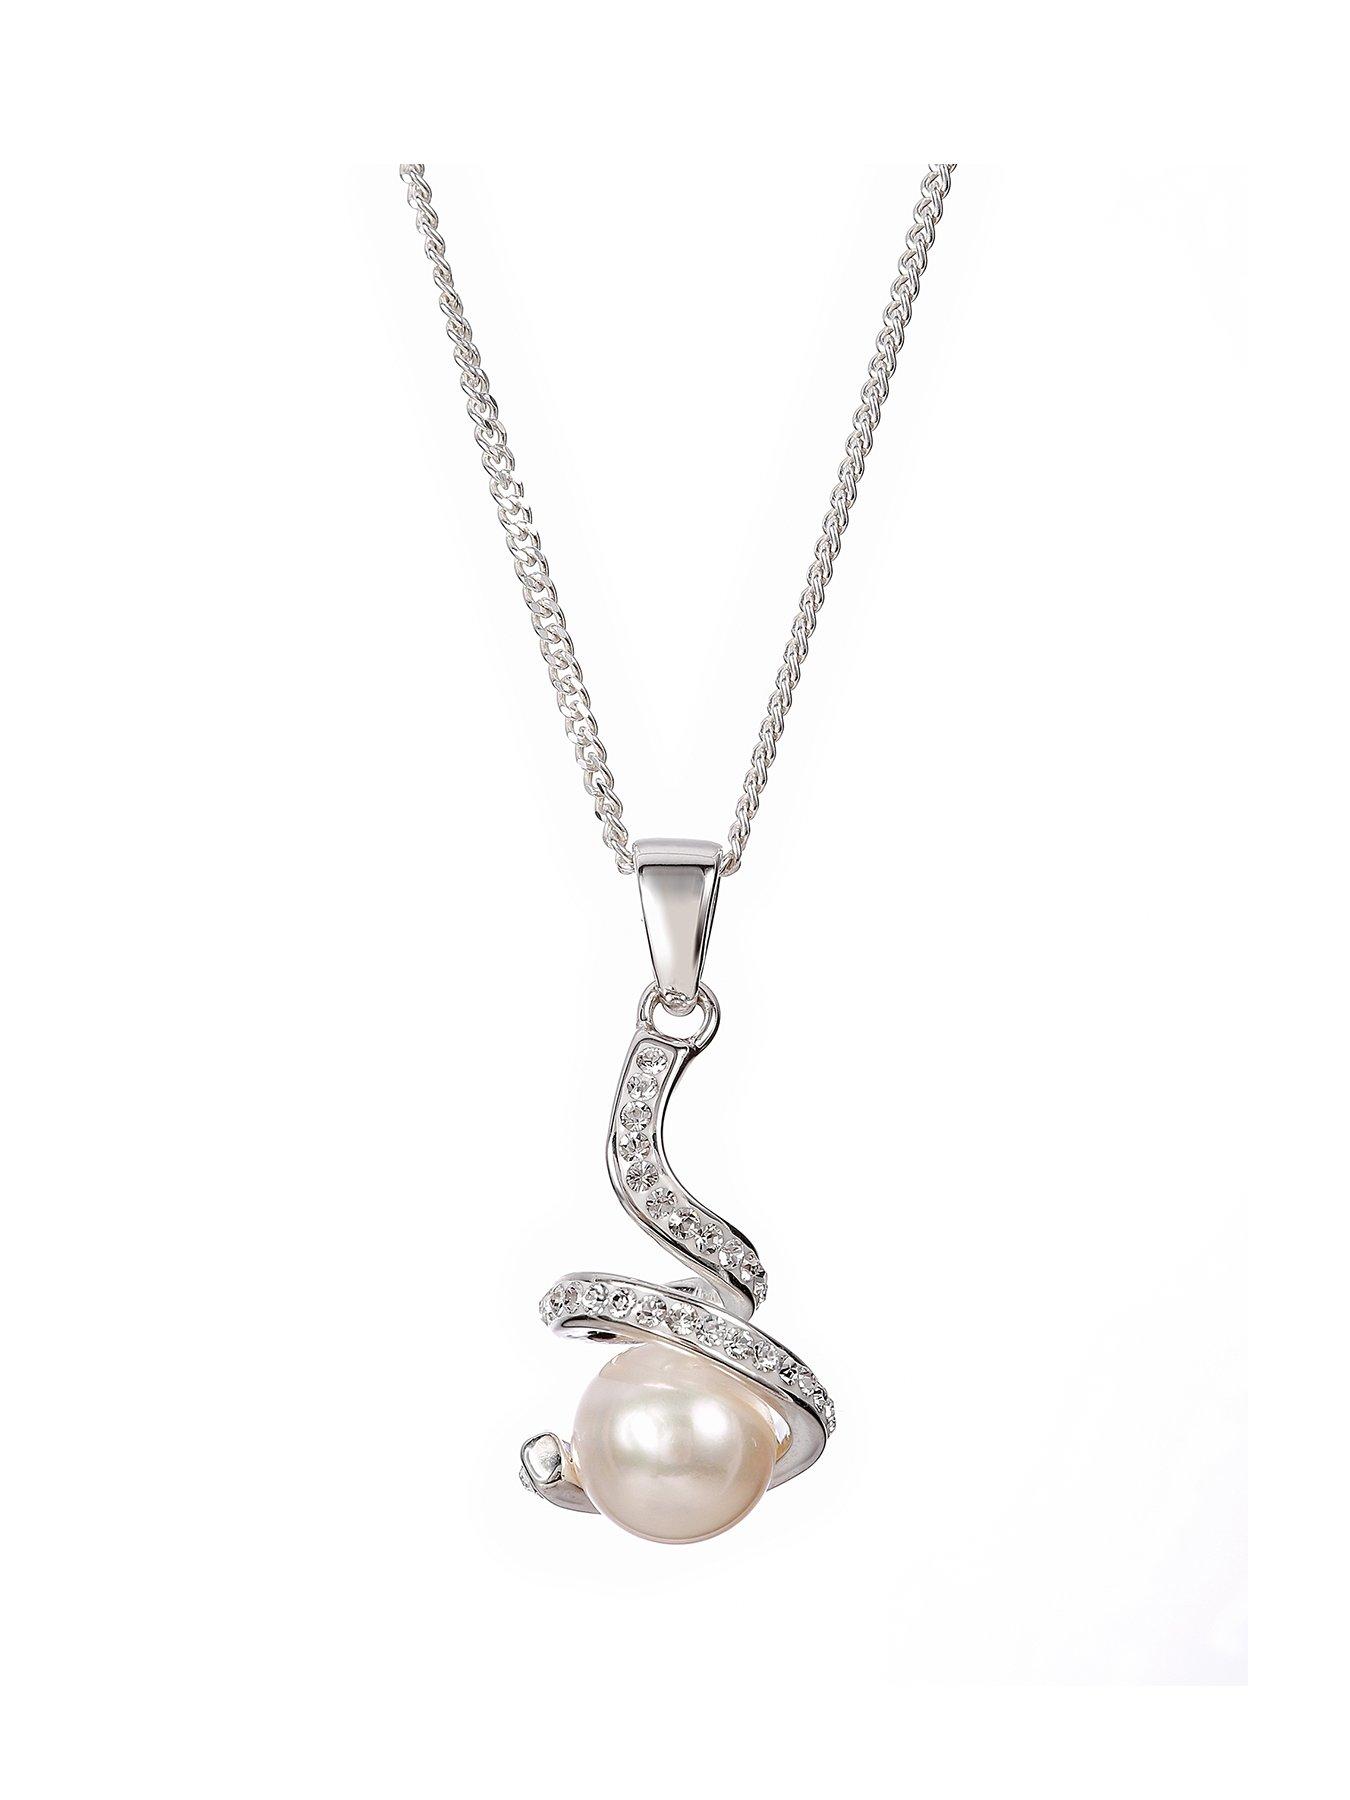 Jewellery & watches Sterling Silver Freshwater Pearl Crystal Pendant Necklace 18 Inches